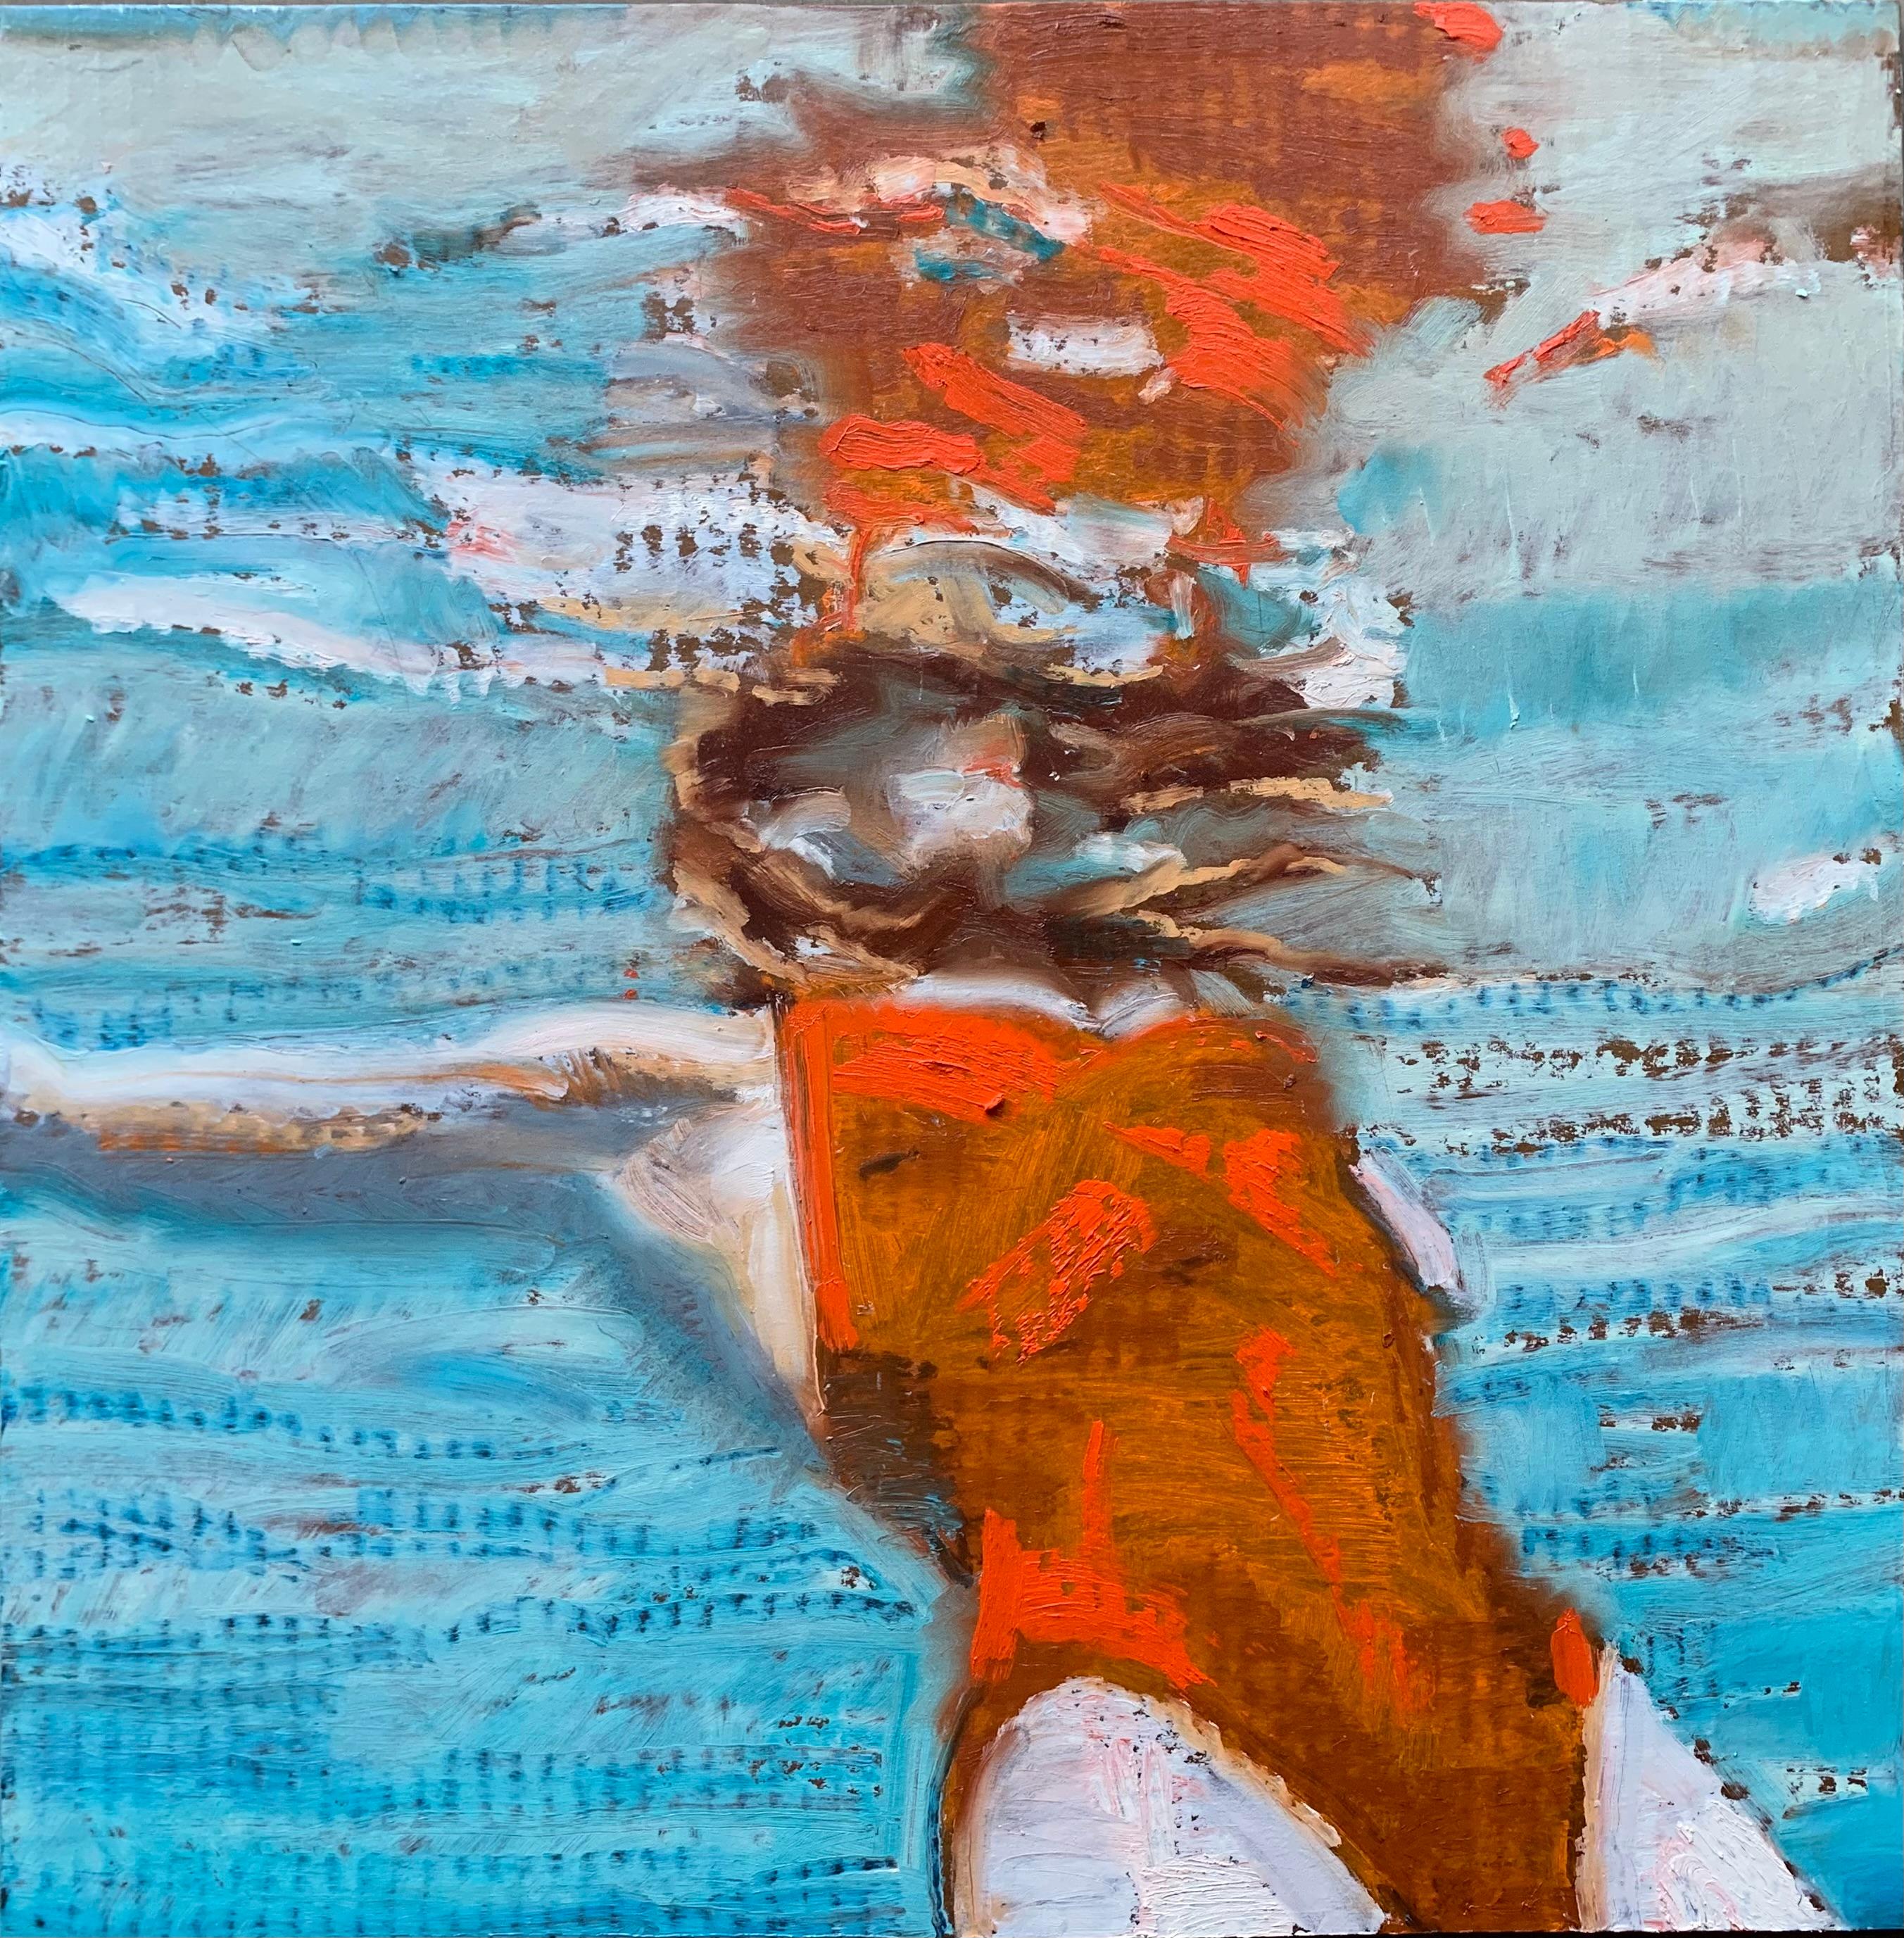 Carol Bennett Figurative Painting - "Orange You Drifting" oil painting of a woman floating in a turquoise pool